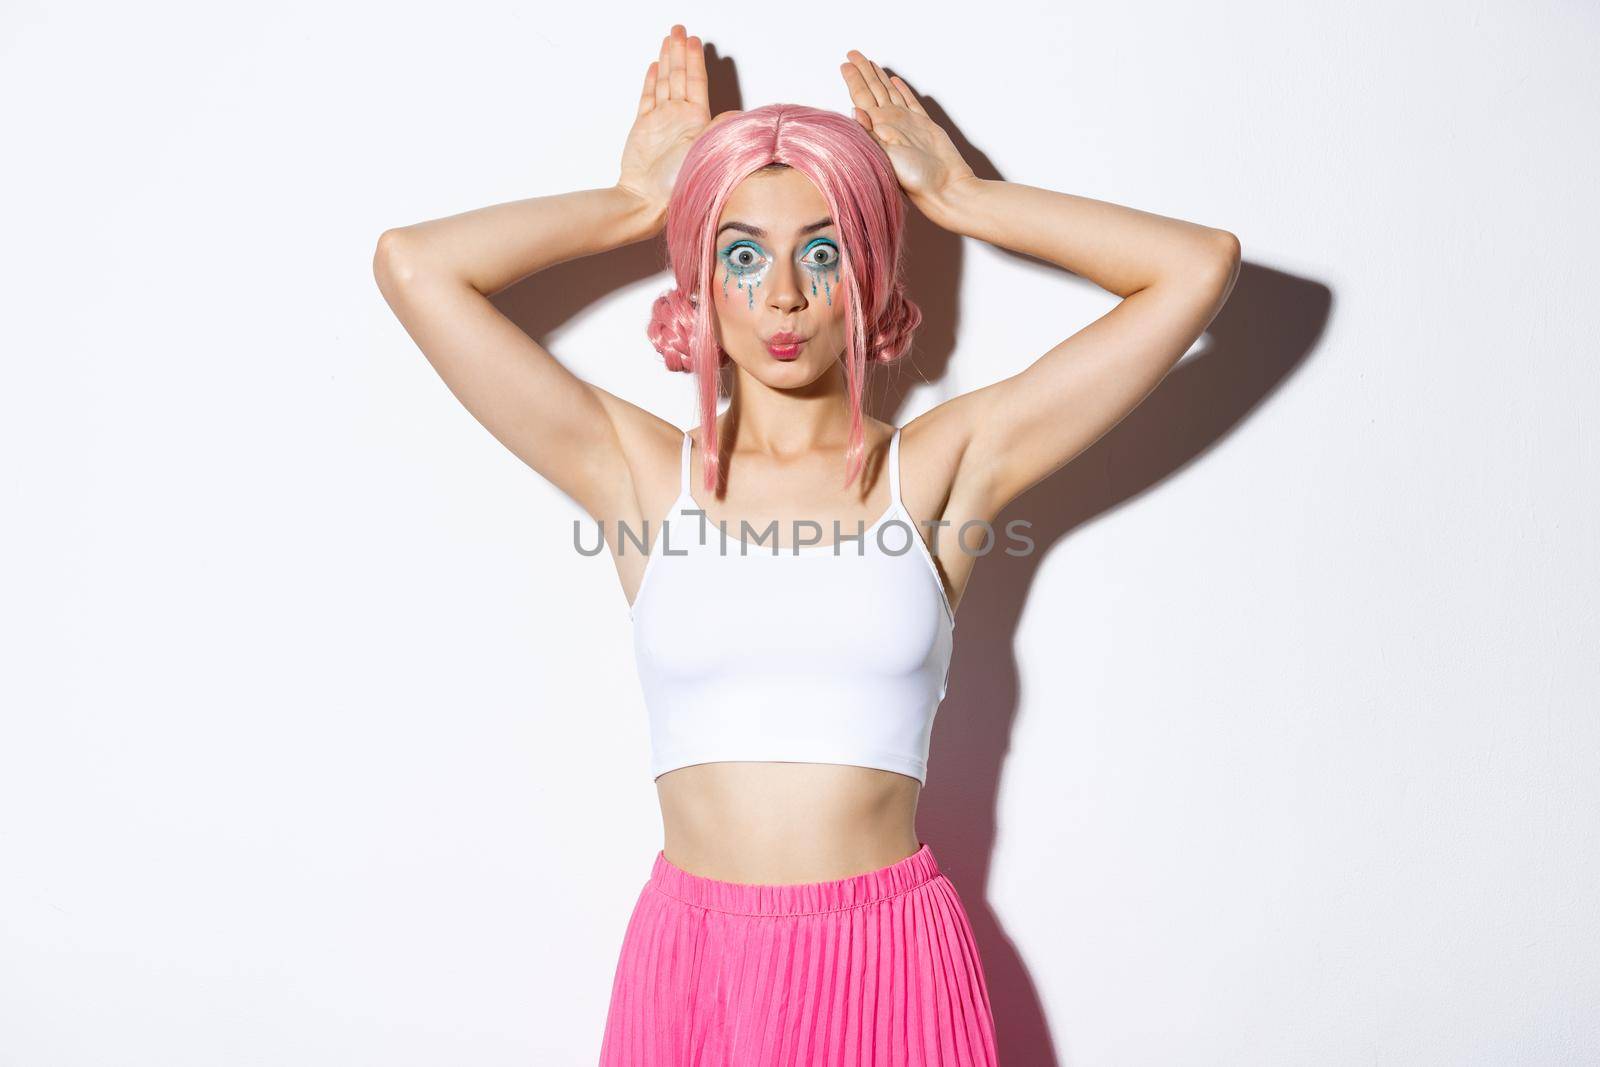 Portrait of lovely party girl in pink anime wig, showing bunny ears and pouting silly, celebrating halloween, standing over white background.